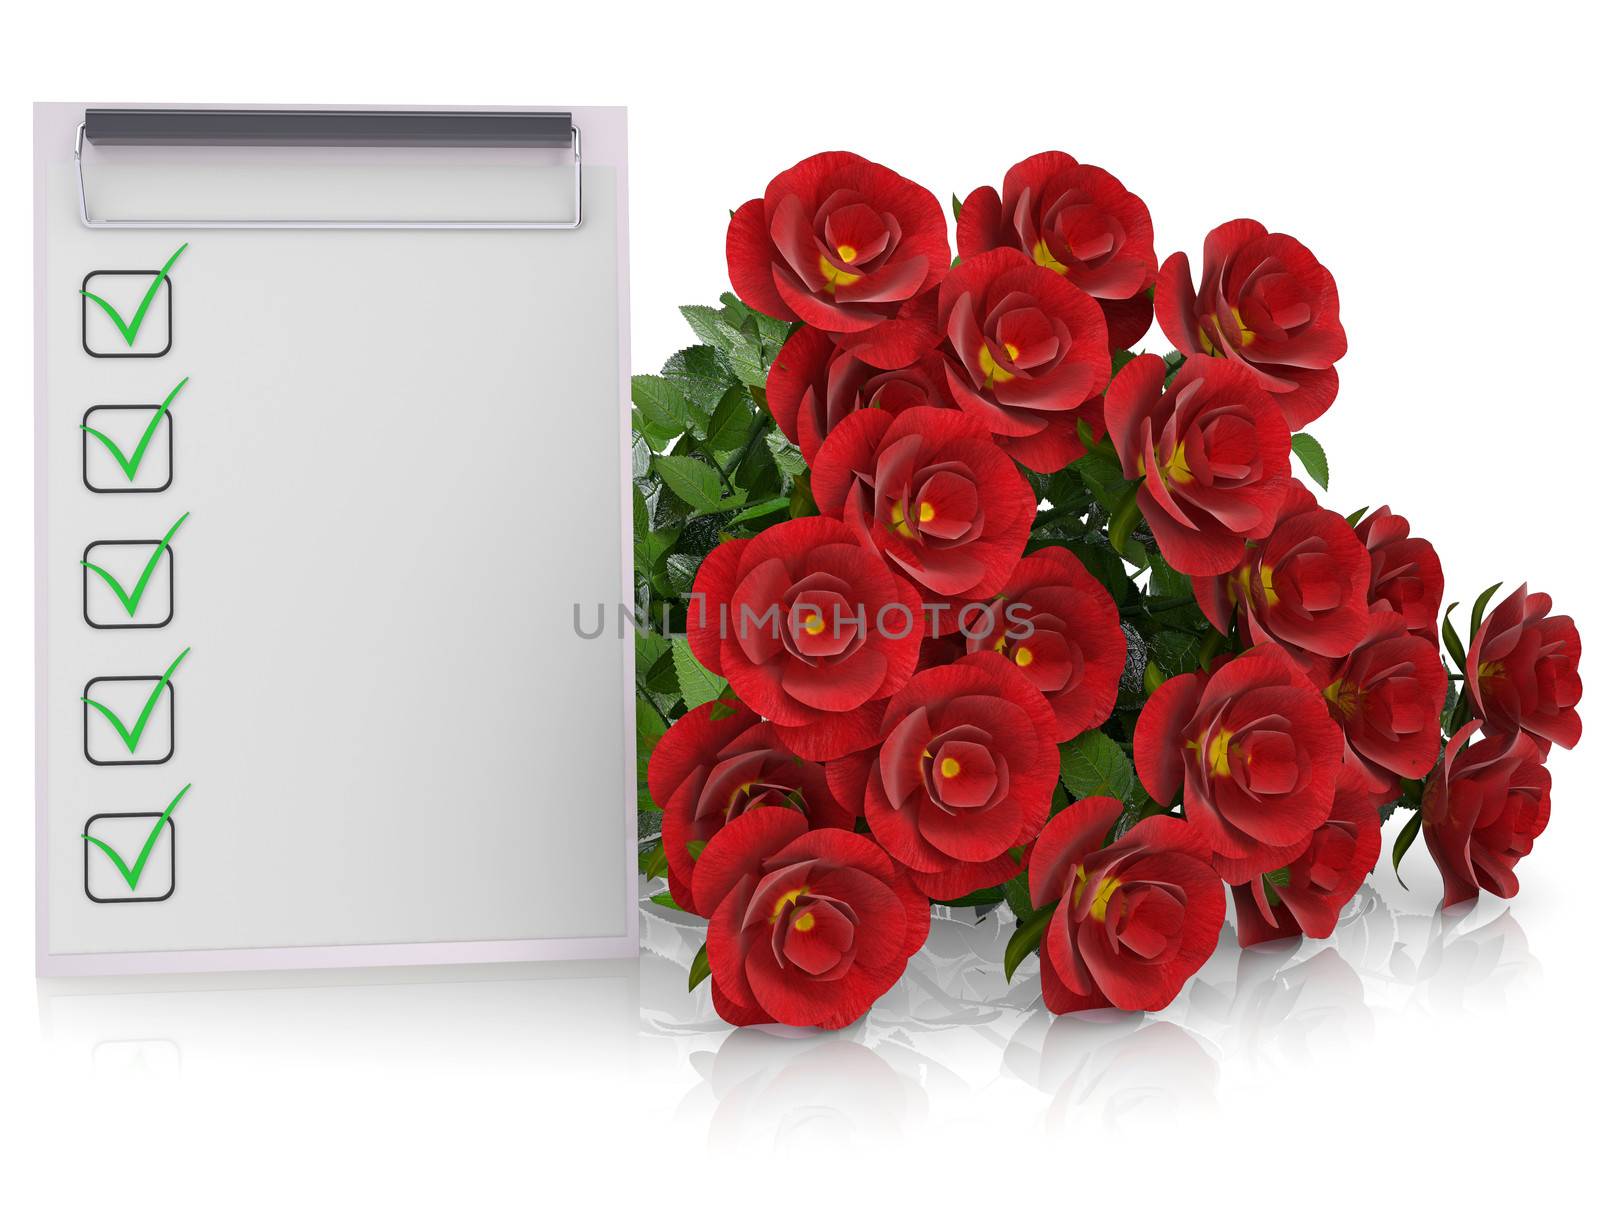 Group of red roses and checklist by cherezoff